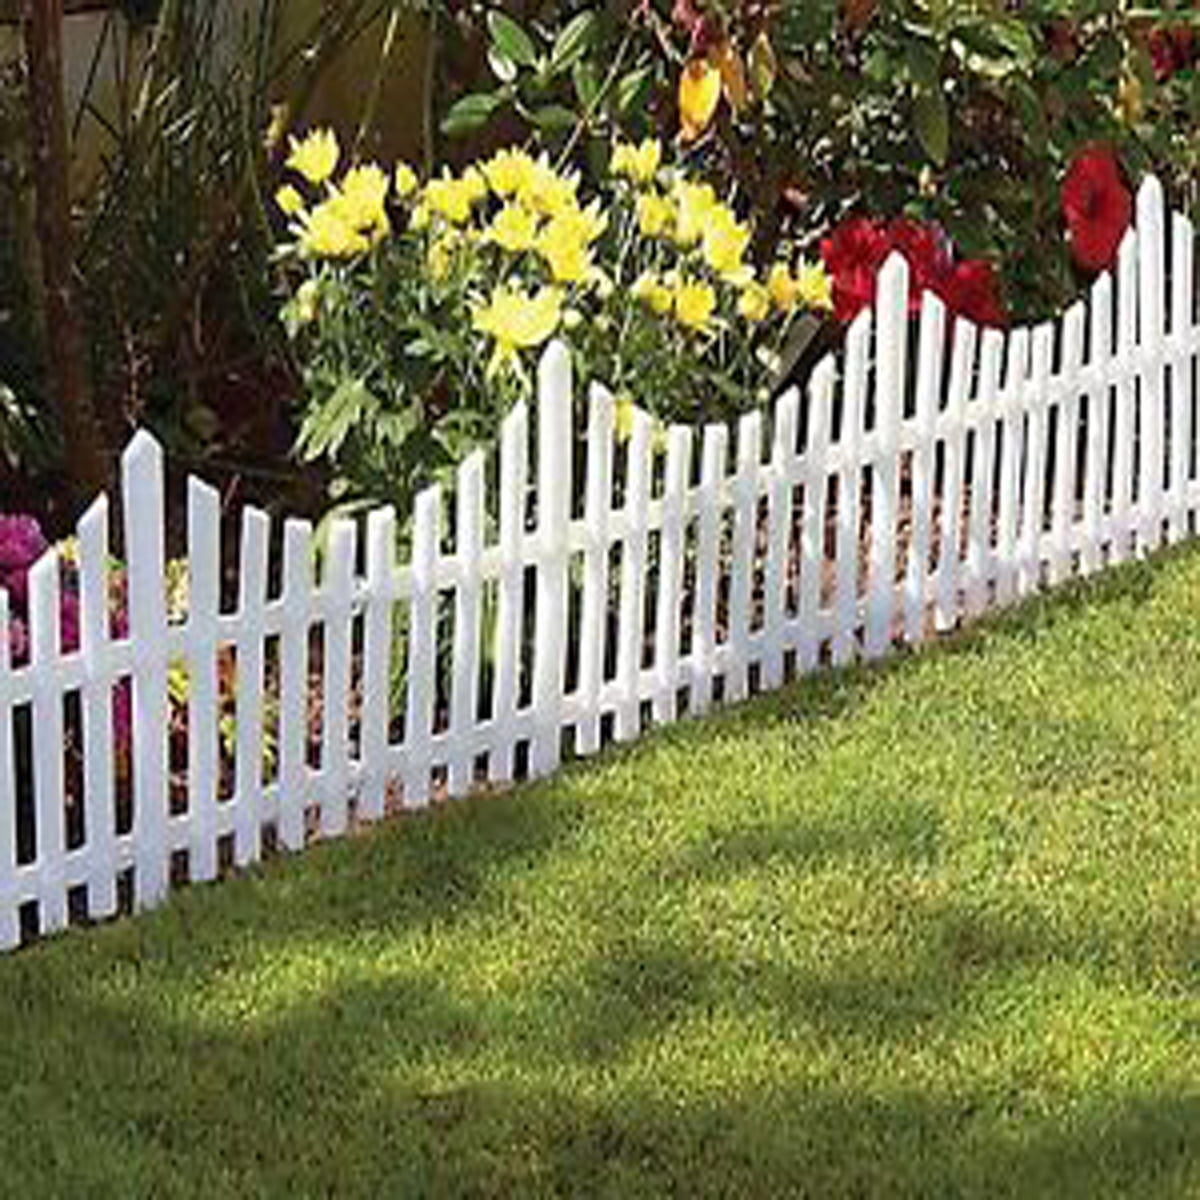 24pcs Plastic Border Fence Yard Lawn Garden Edging Plant Flower Bed Outdoor Home 